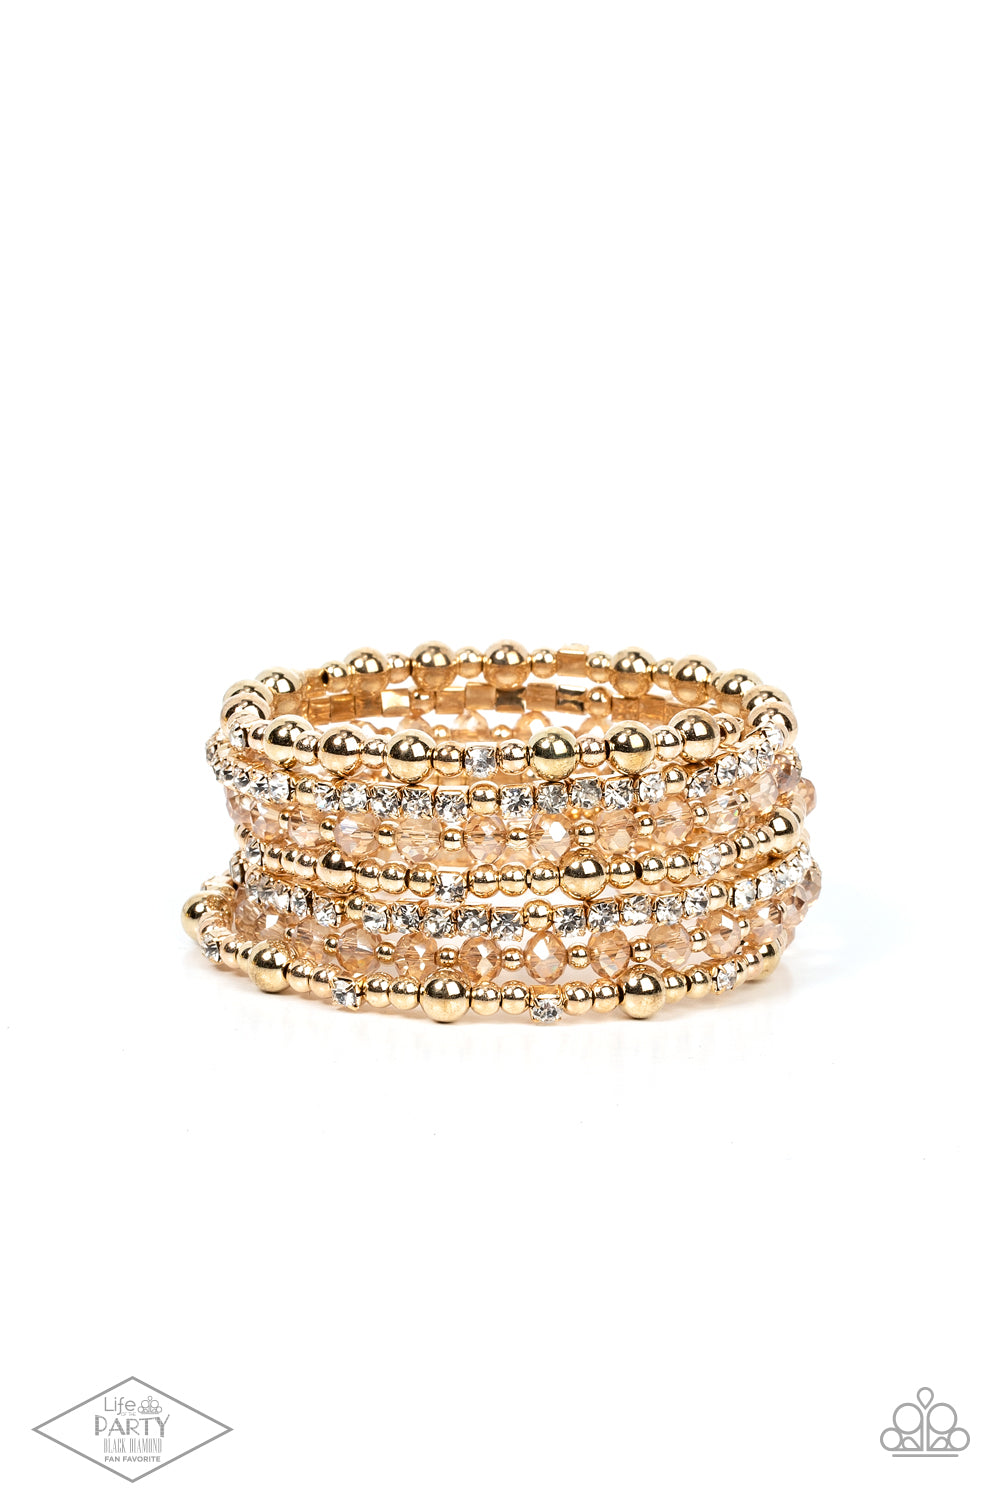 ICE Knowing You Gold Bracelet - Paparazzi Accessories  An icy collection of gold beads, gold cubes, golden crystals, and glassy white rhinestones are threaded along a coiled wire, creating a blinding infinity wrap style bracelet around the wrist.  Sold as one individual bracelet. This Fan Favorite is back in the spotlight at the request of our 2021 Life of the Party member with Black Diamond Access, Martha M.